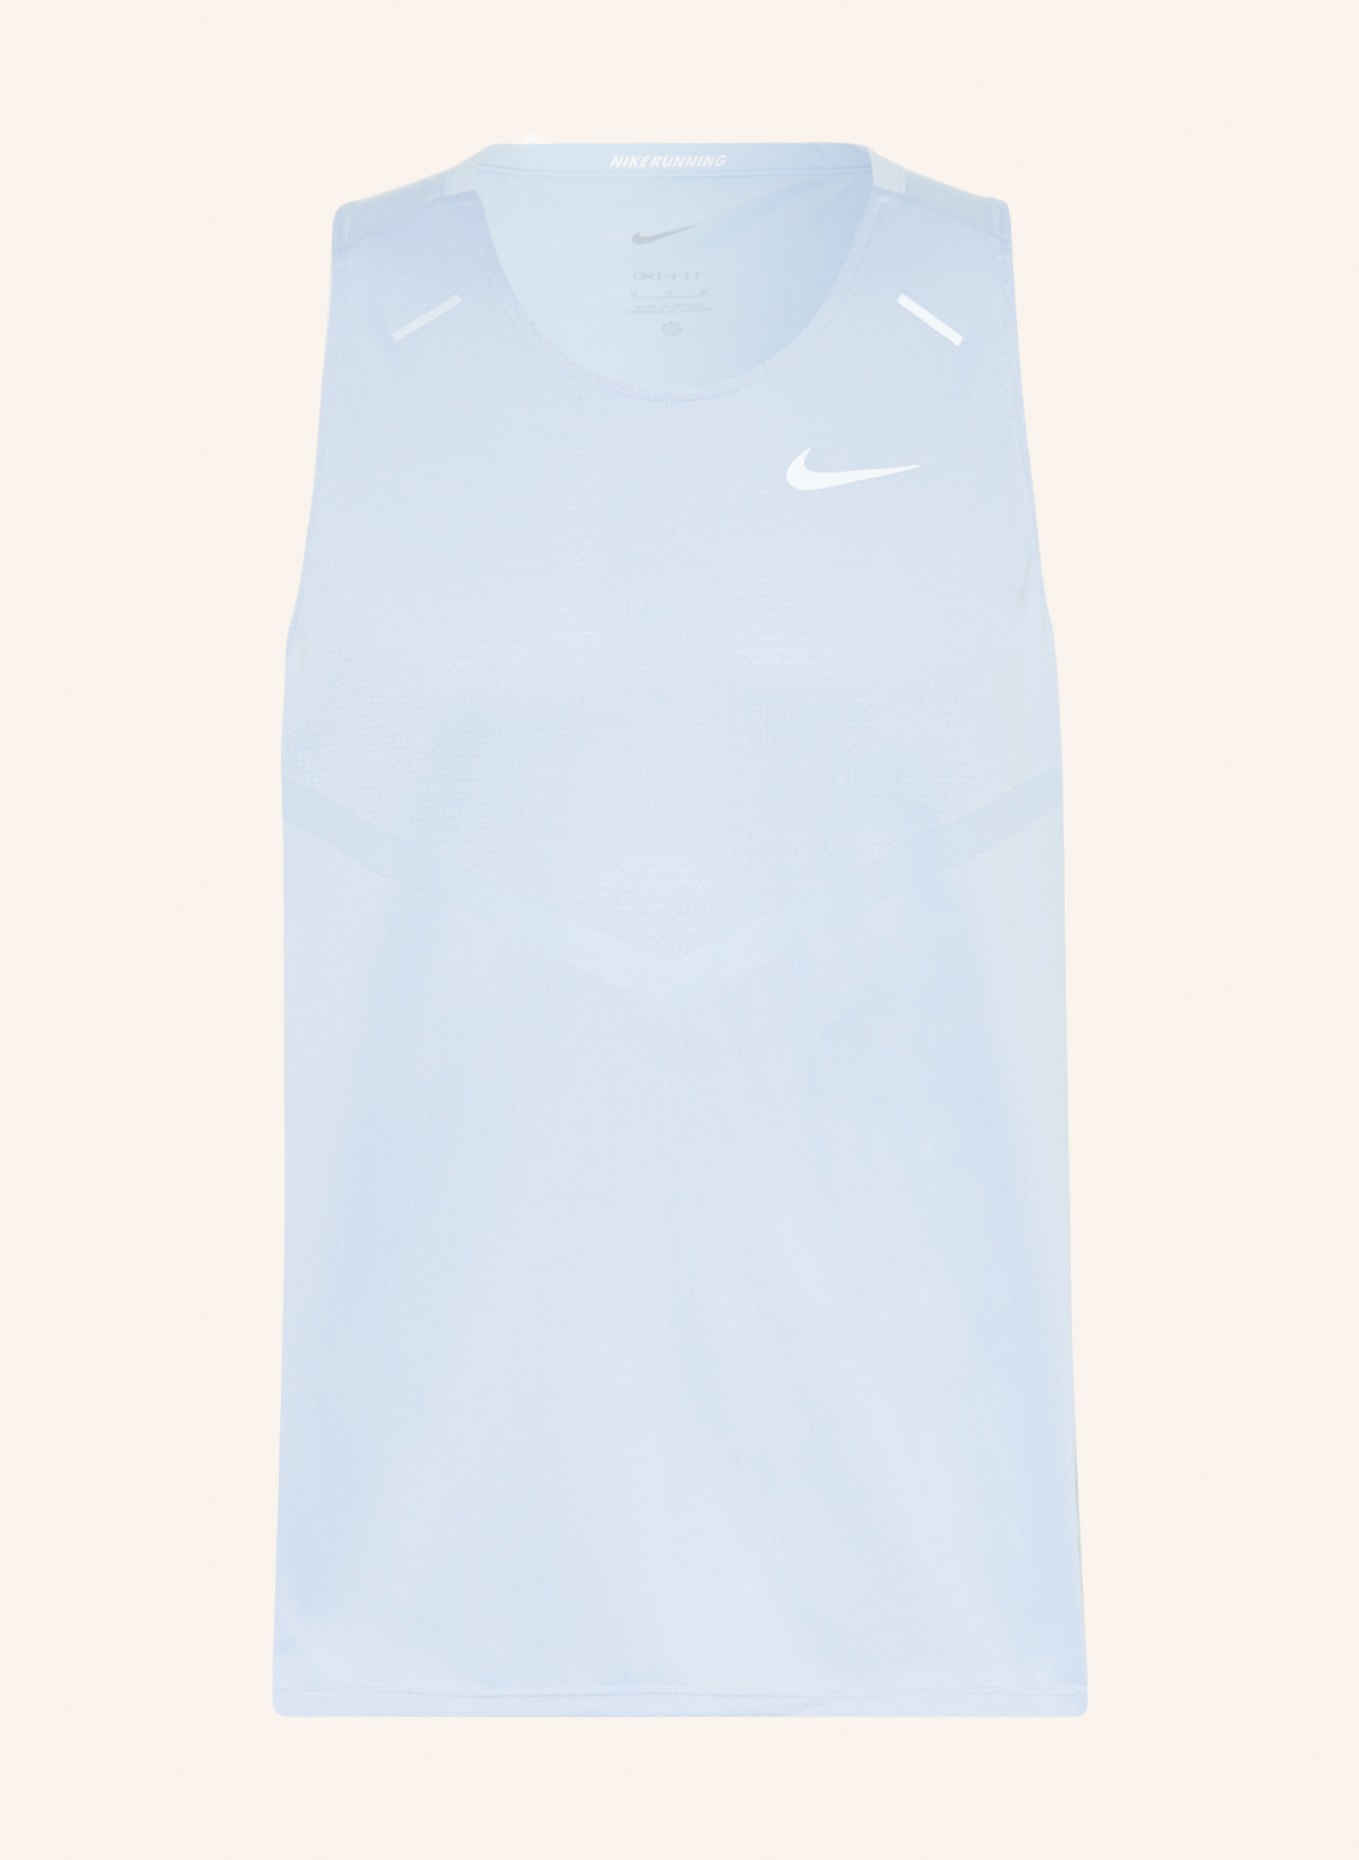 Nike Running top RISE 365, Color: LIGHT BLUE(Image null)